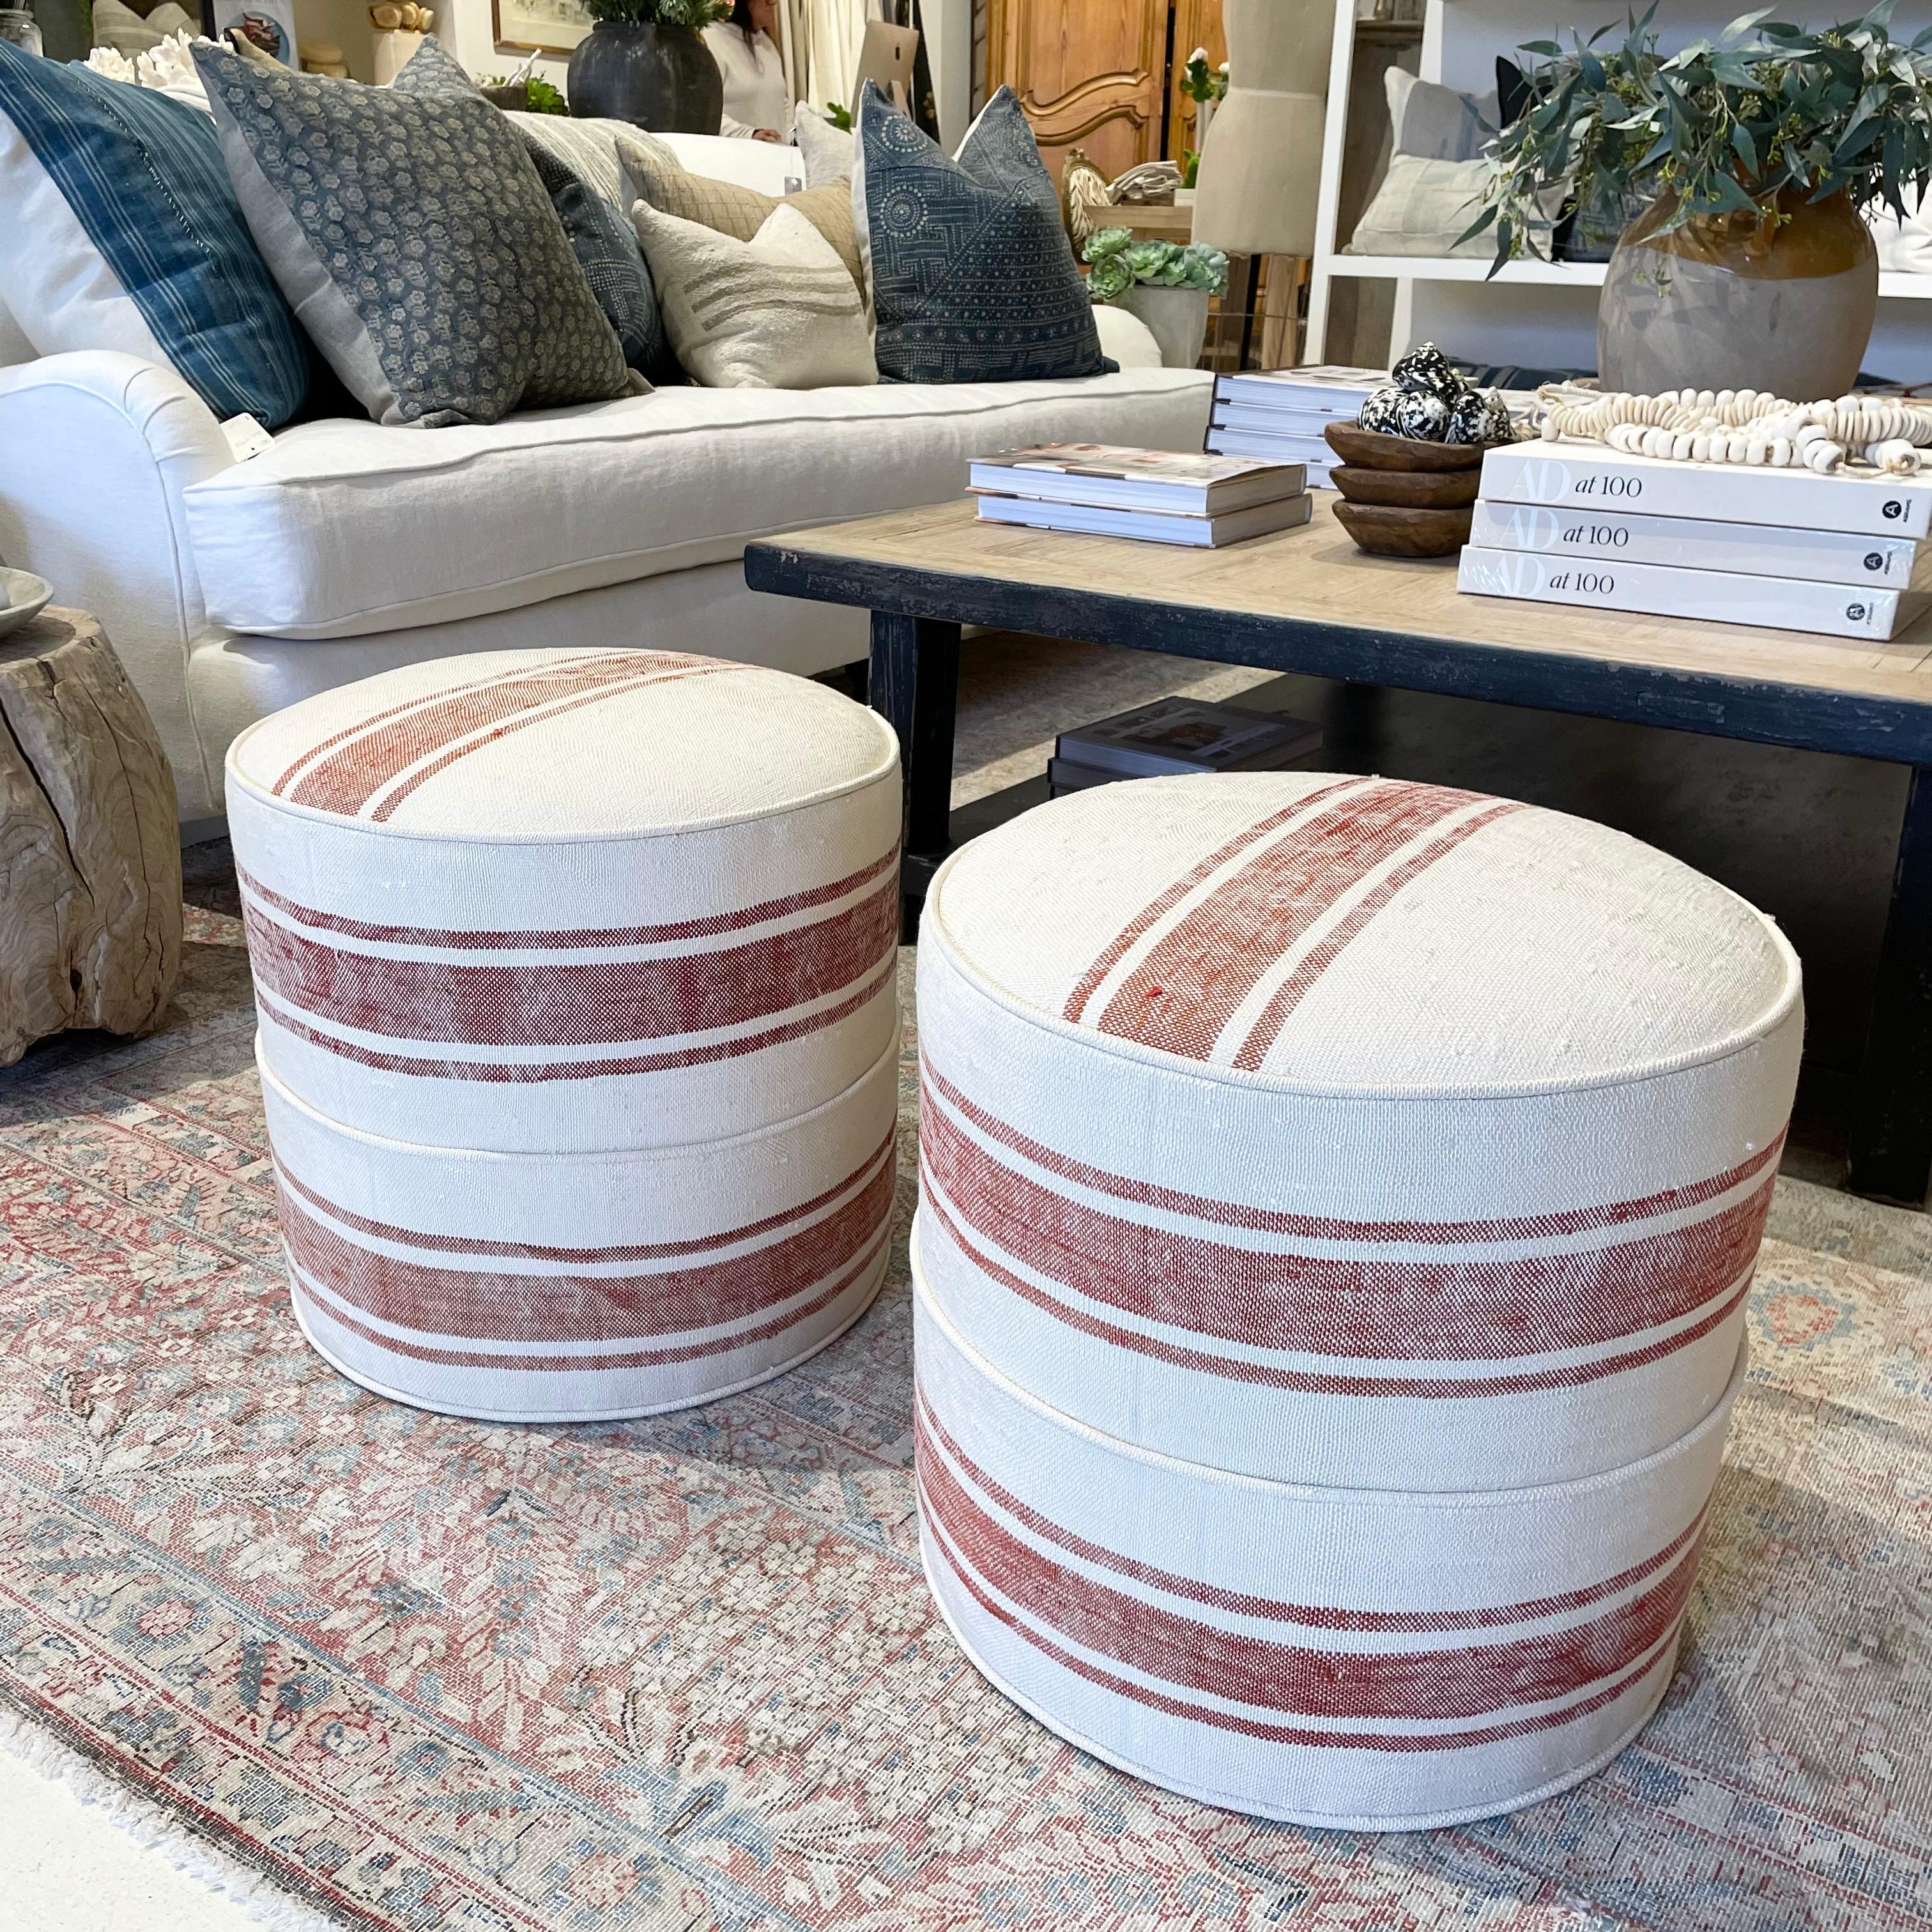 Custom made round ottomans from a woven Sabra silk rug 
The background is a creamy white, with burnt orange color stripe.
These custom ottomans hold their shape, and are custom made with a wood frame, foam top in a medium firm density.
Size: 18”